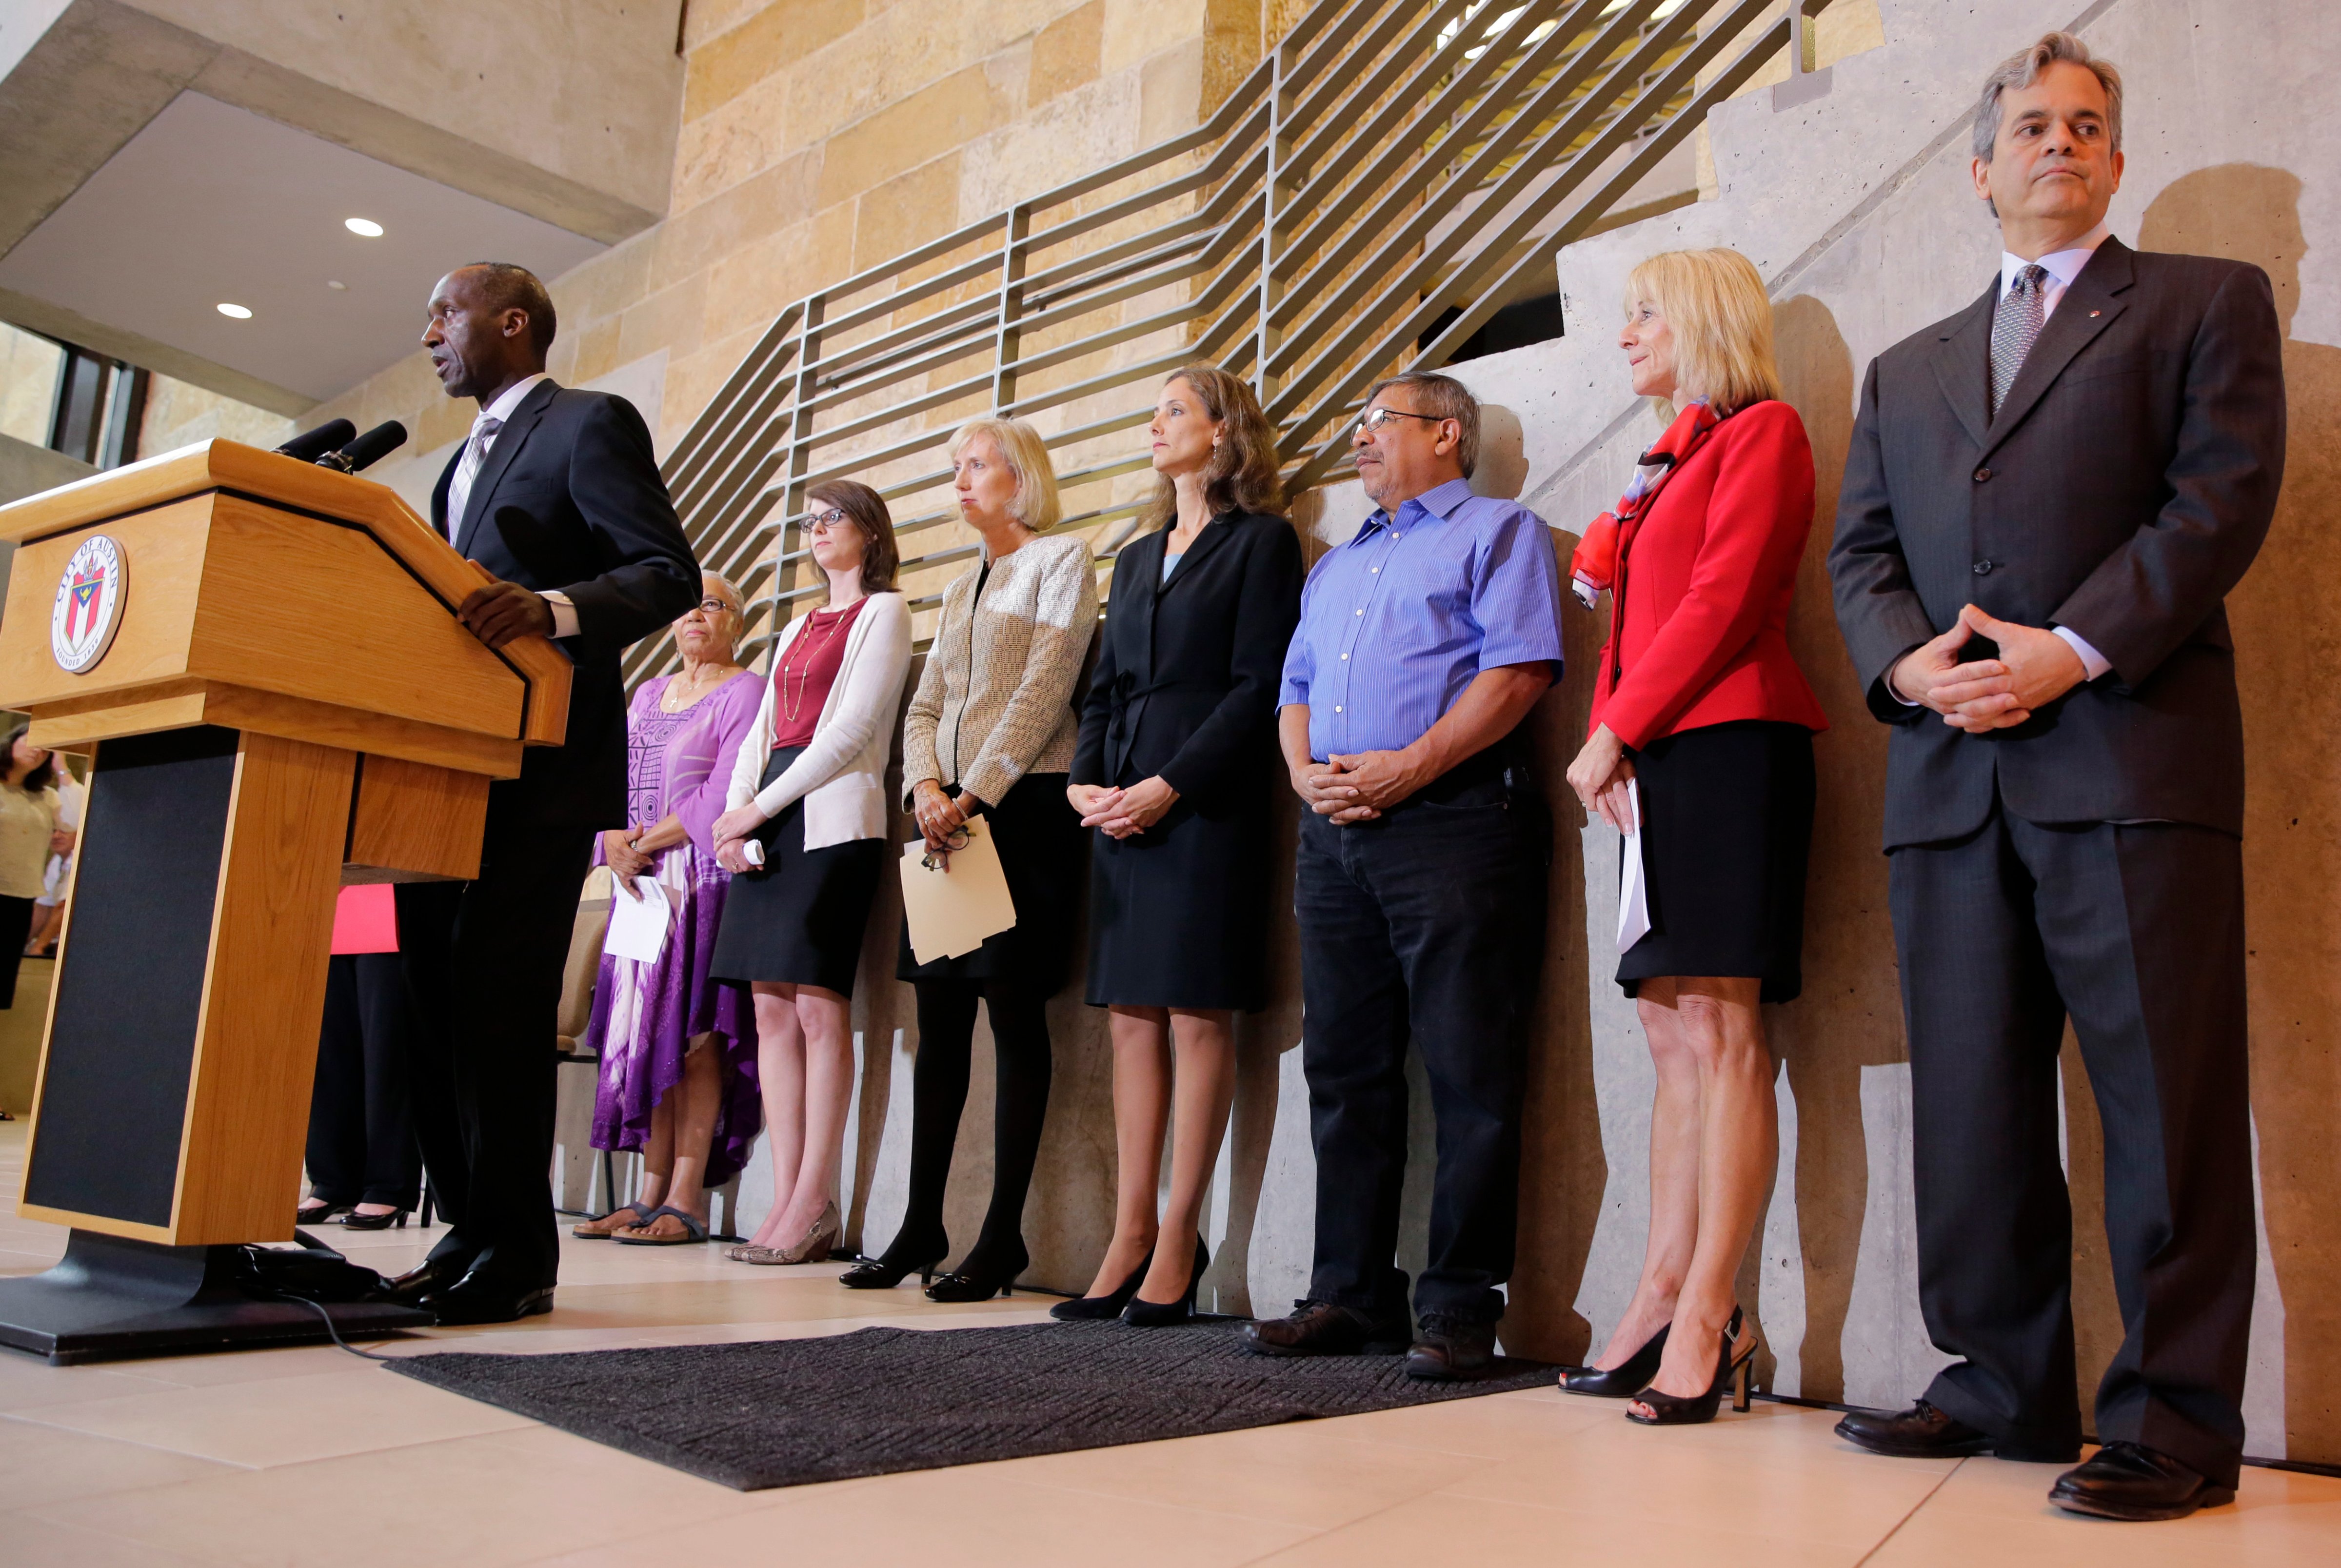 Members of the Austin city council listen to city manager Marc Ott during a news conference at City Hall, on May 13, 2015, in Austin, Texas.